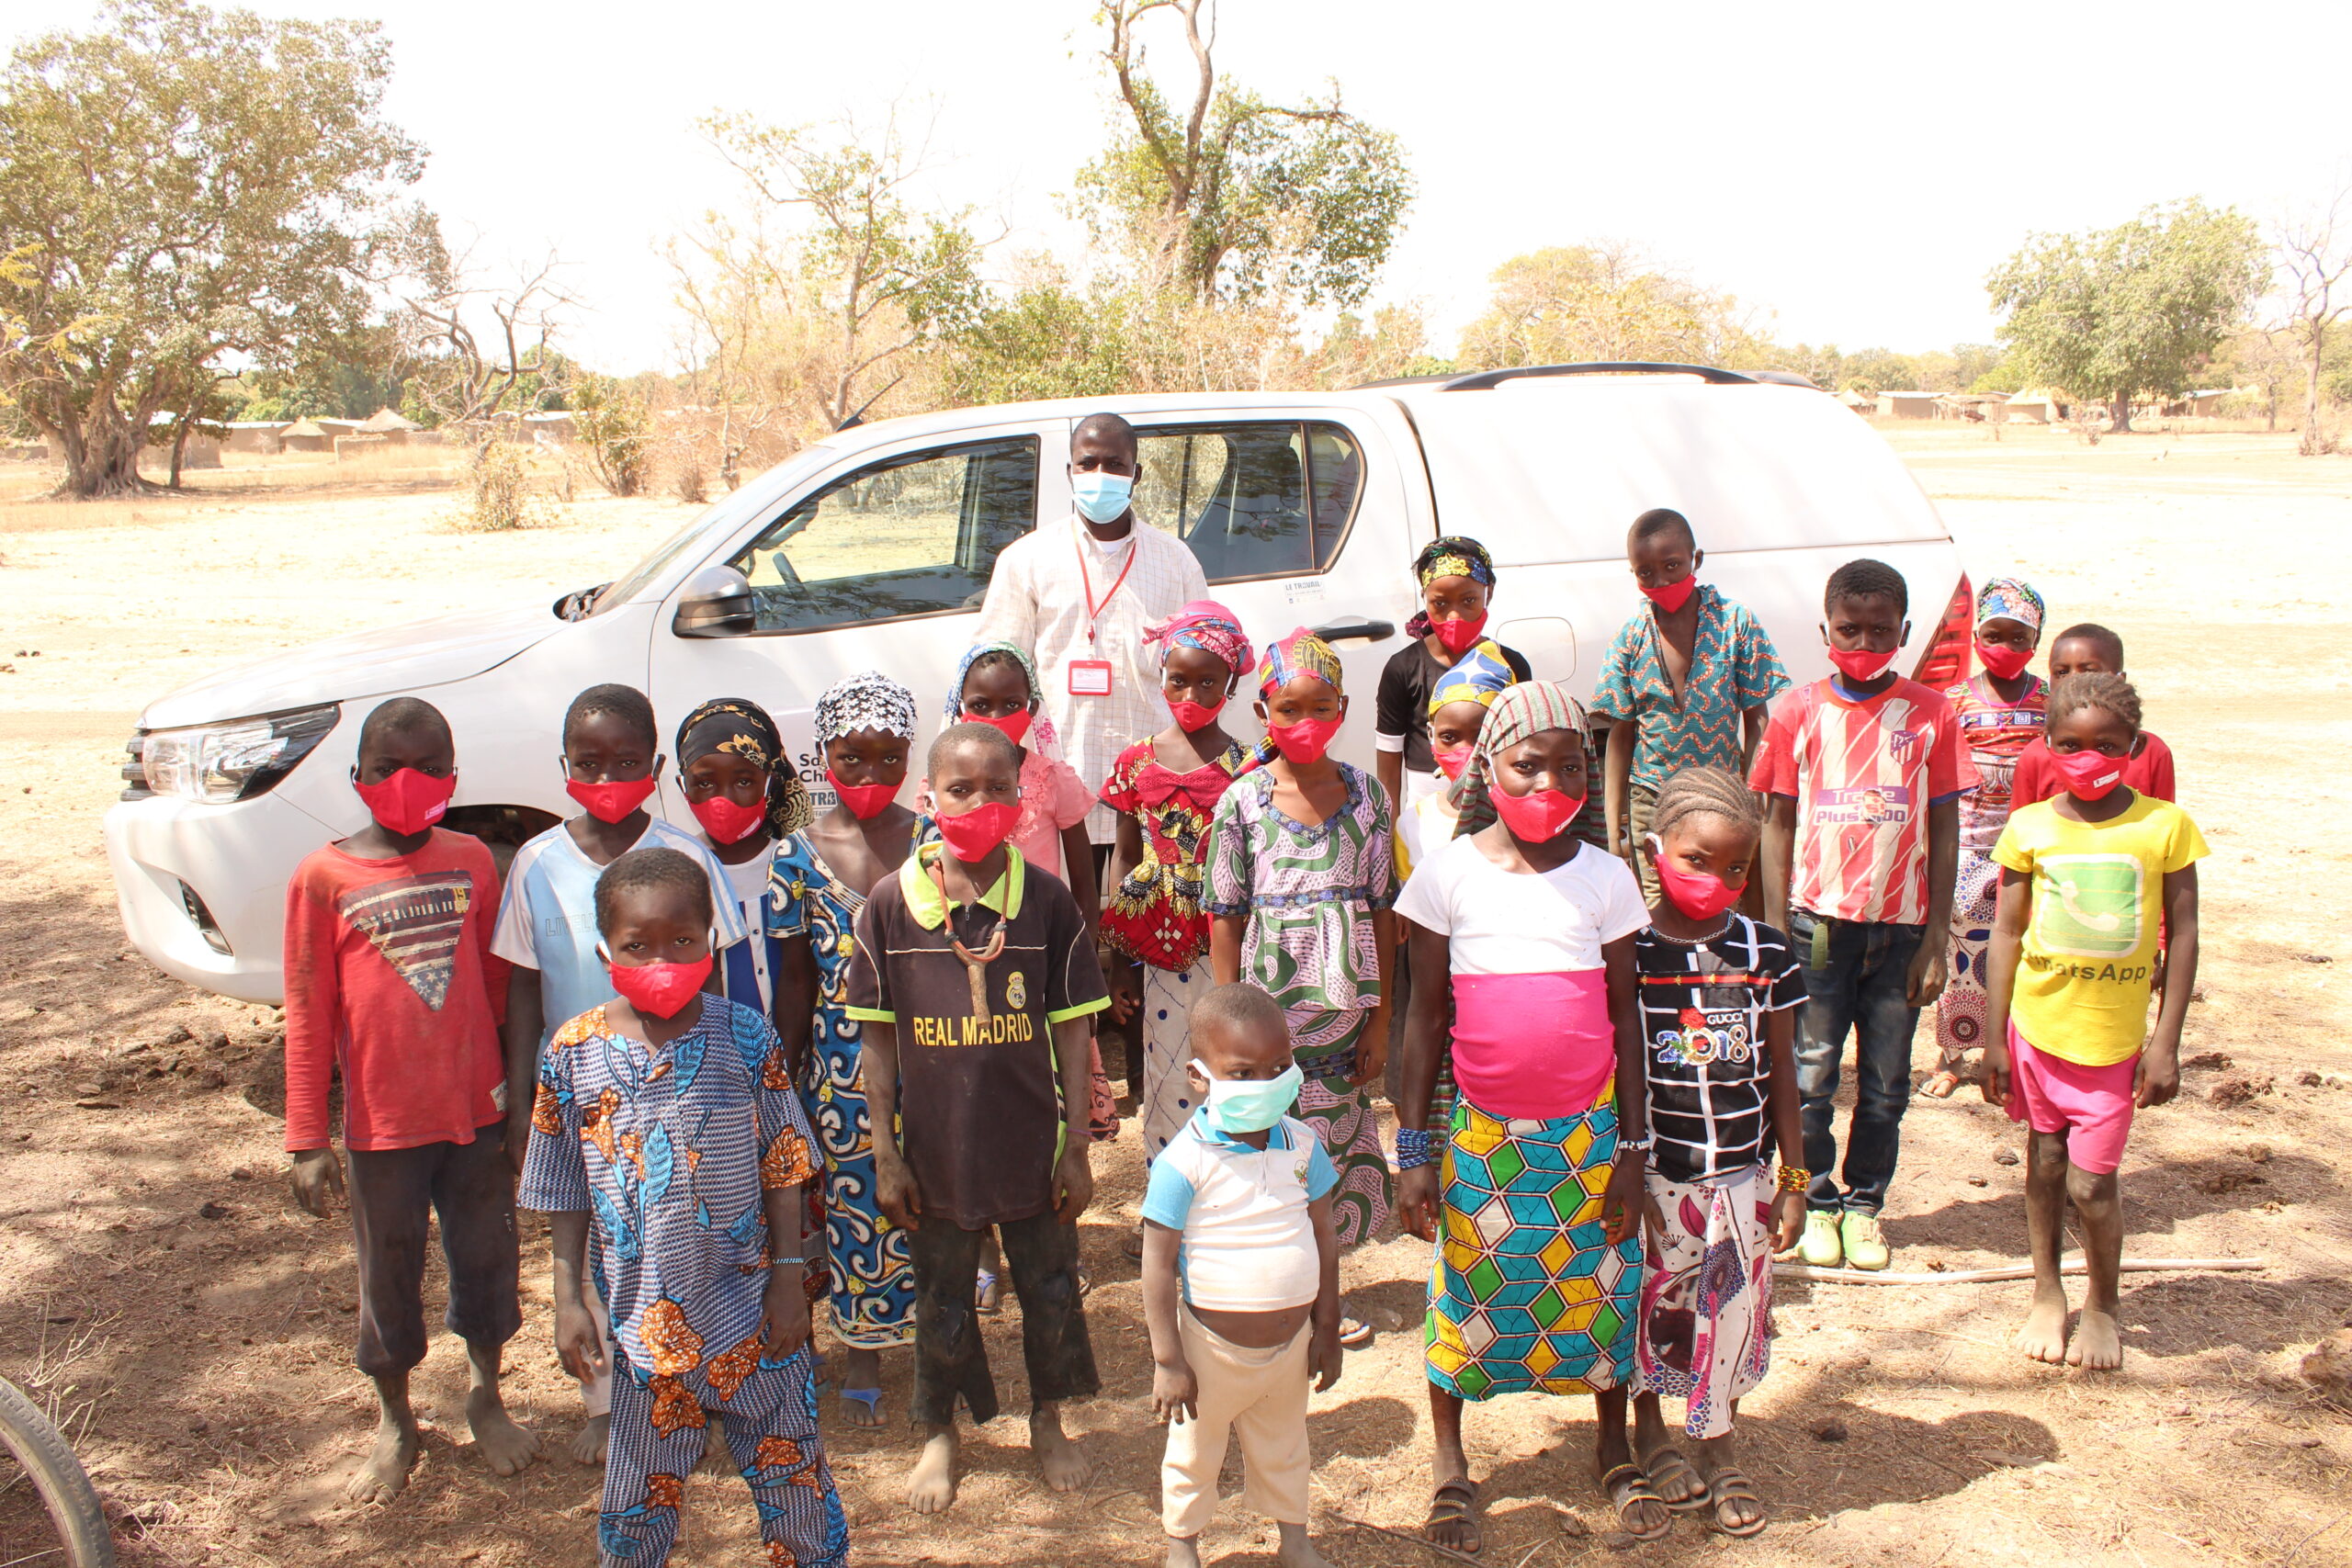 Mali: Support for village school and quality education